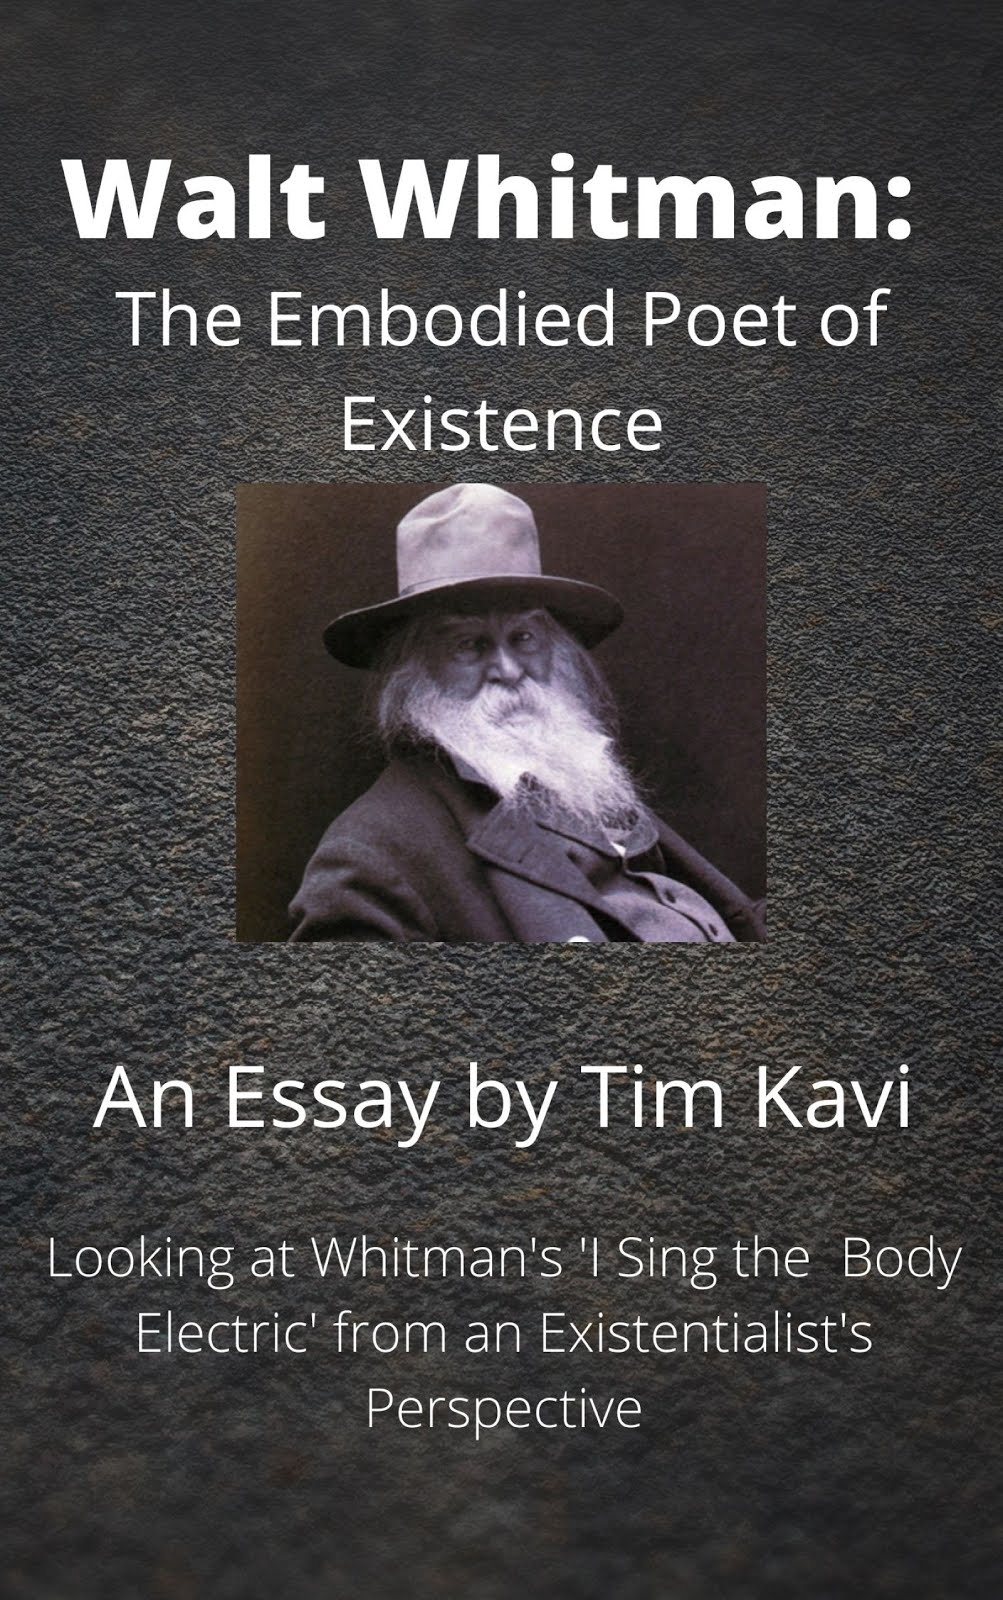 Walt Whitman: The Embodied Poet. Recently Published Essay!